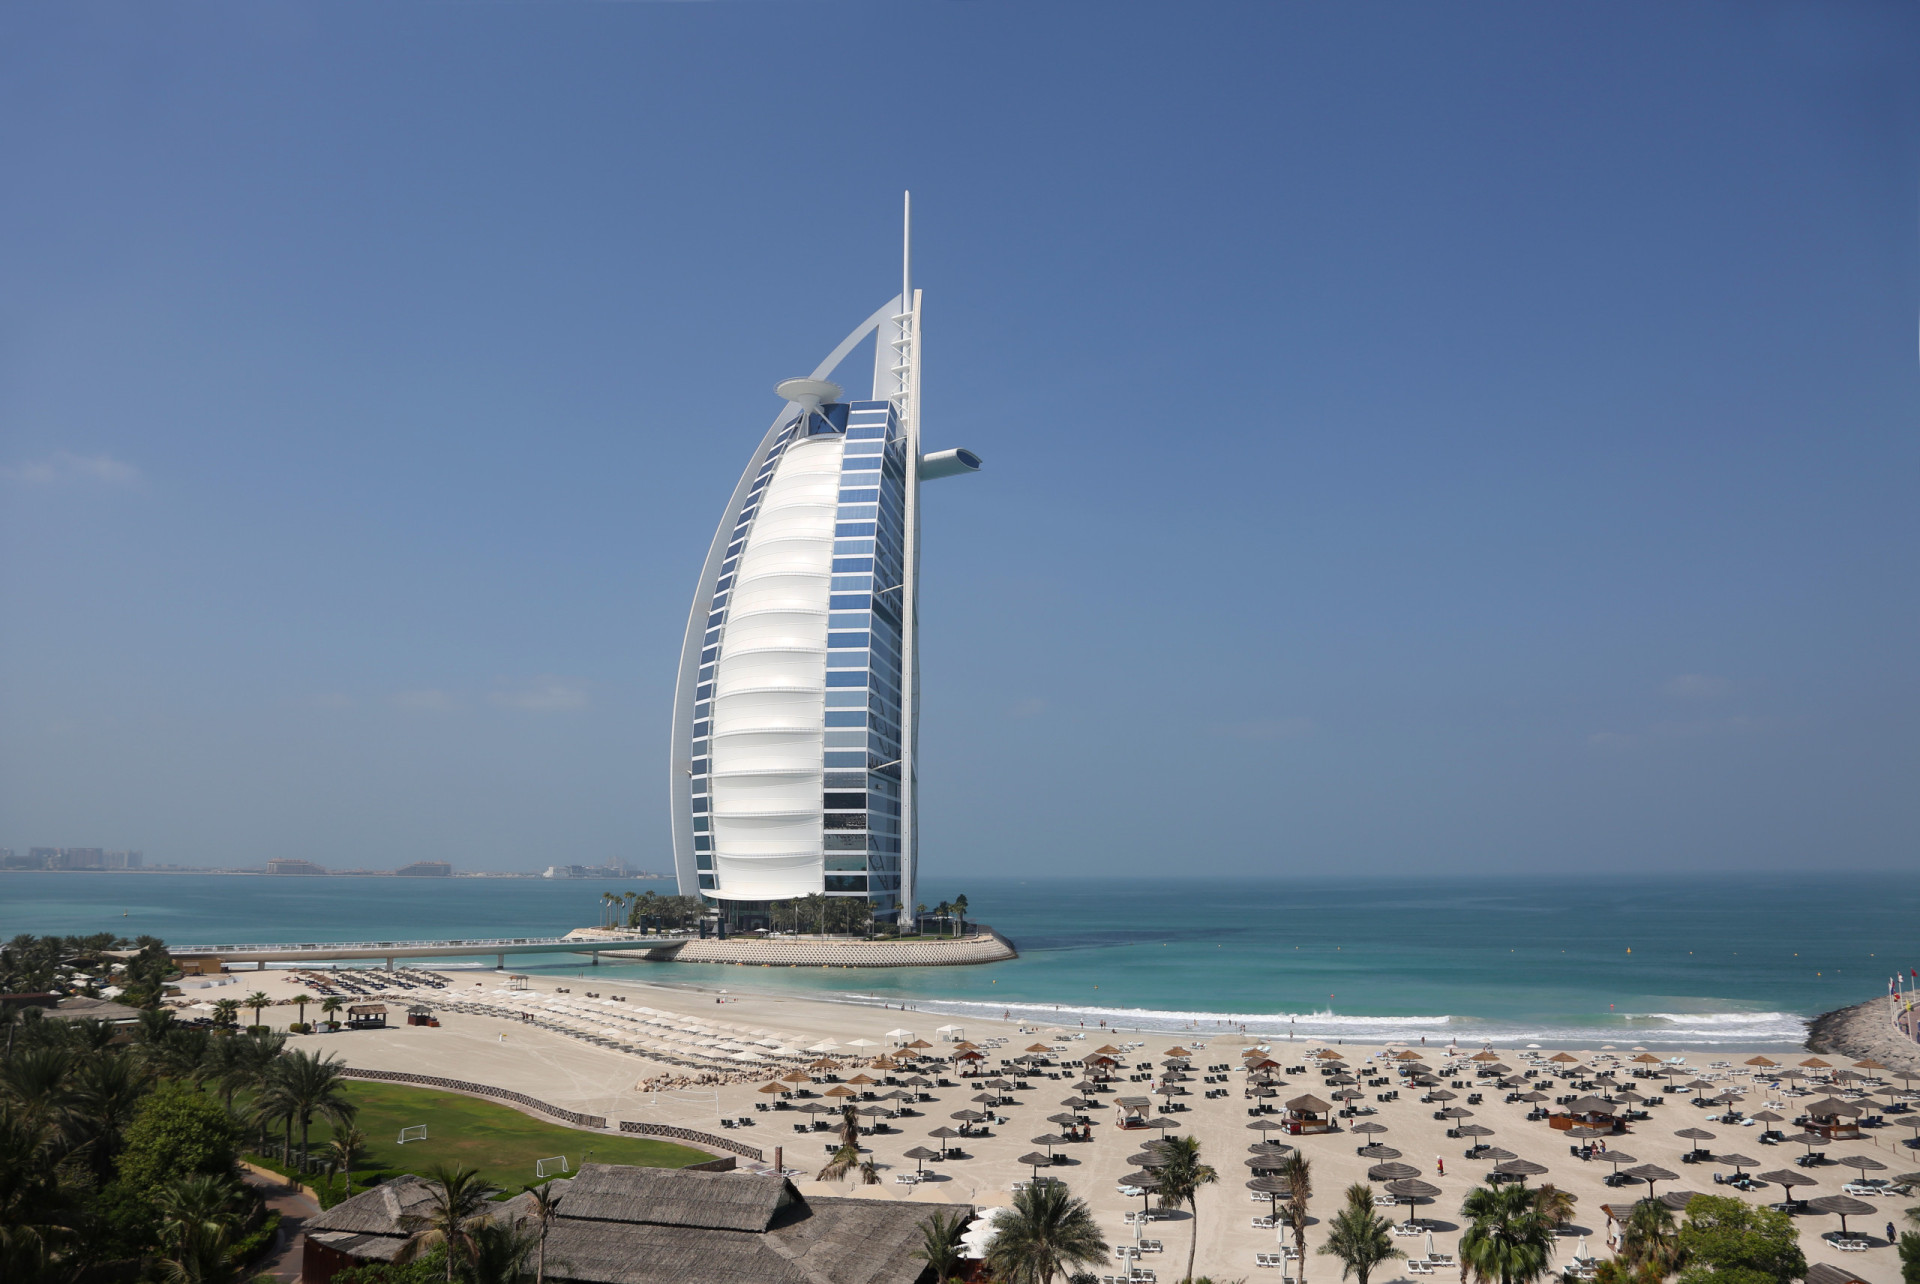 <p>Live like royalty at one of the few seven-star hotels in the world, Burj-Al-Arab in Dubai. The spacious Royal Suite is on the 25th floor and is dripping in 22-karat gold. Pure luxury.</p><p>You may also like:<a href="https://www.starsinsider.com/n/335344?utm_source=msn.com&utm_medium=display&utm_campaign=referral_description&utm_content=555492en-us"> Lauryn Hill hosts surprise Fugees reunion before Pras Michel's prison sentencing </a></p>